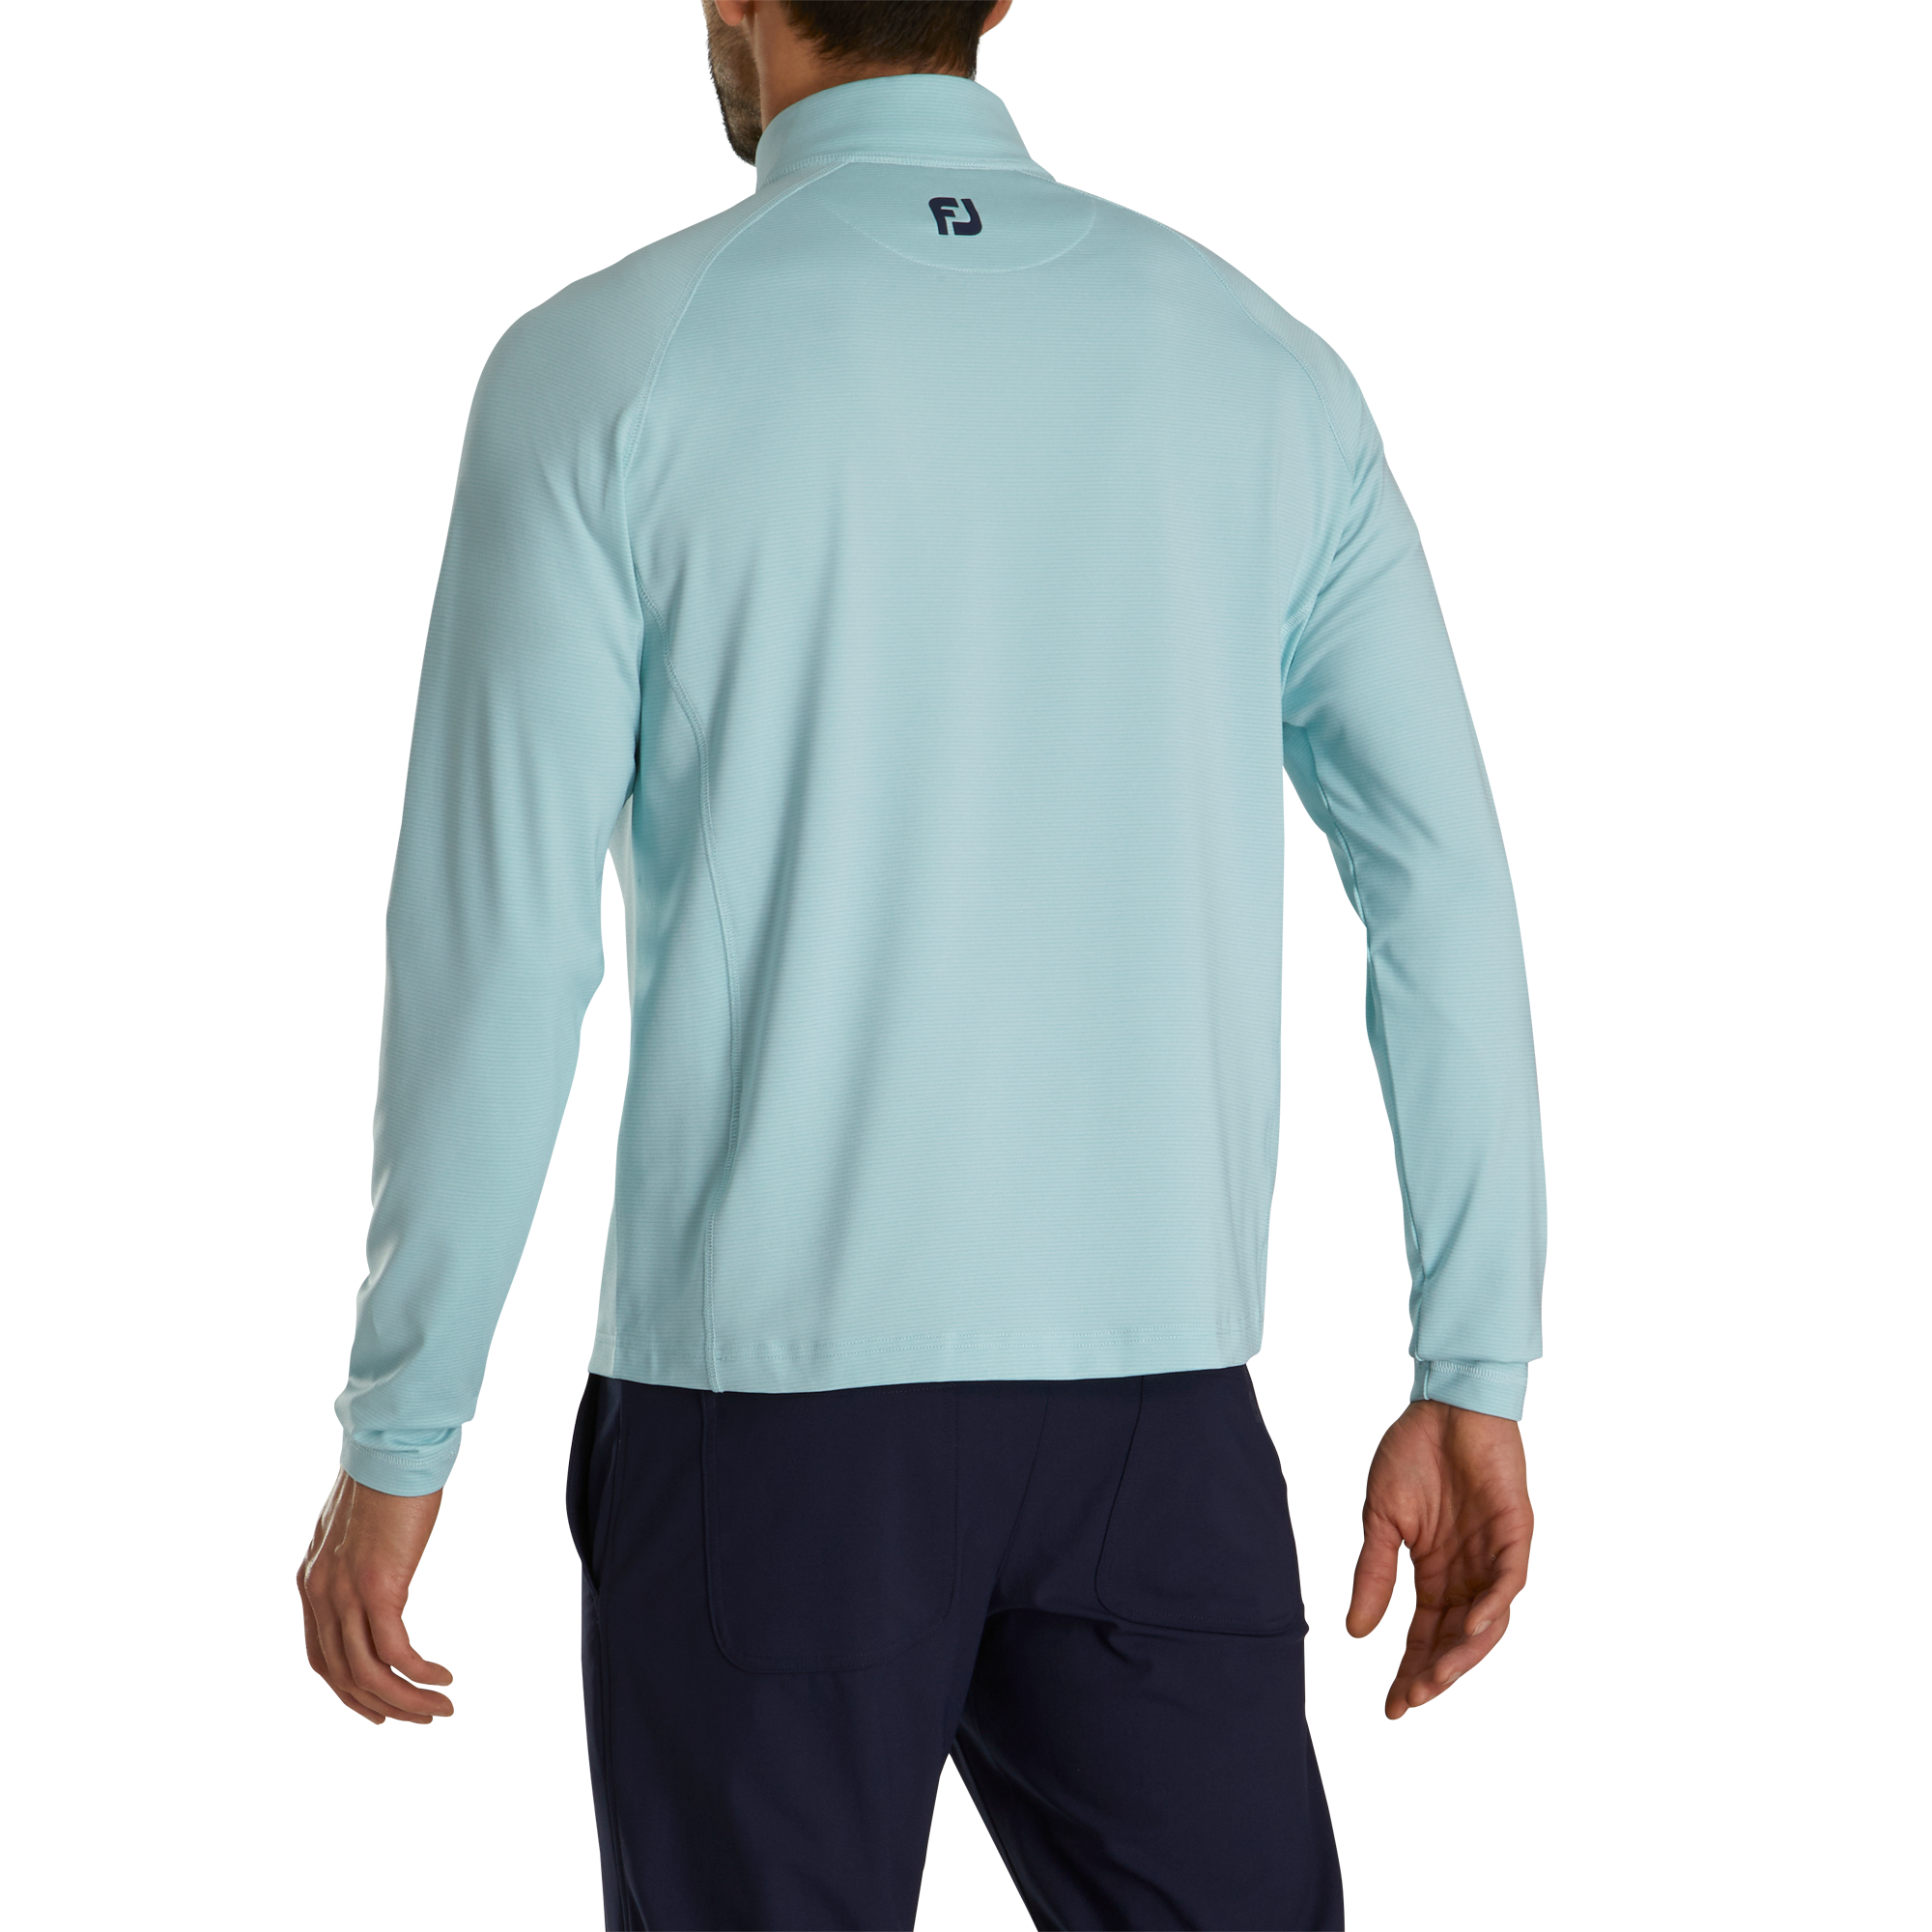 ThermoSeries Brushed Midlayer